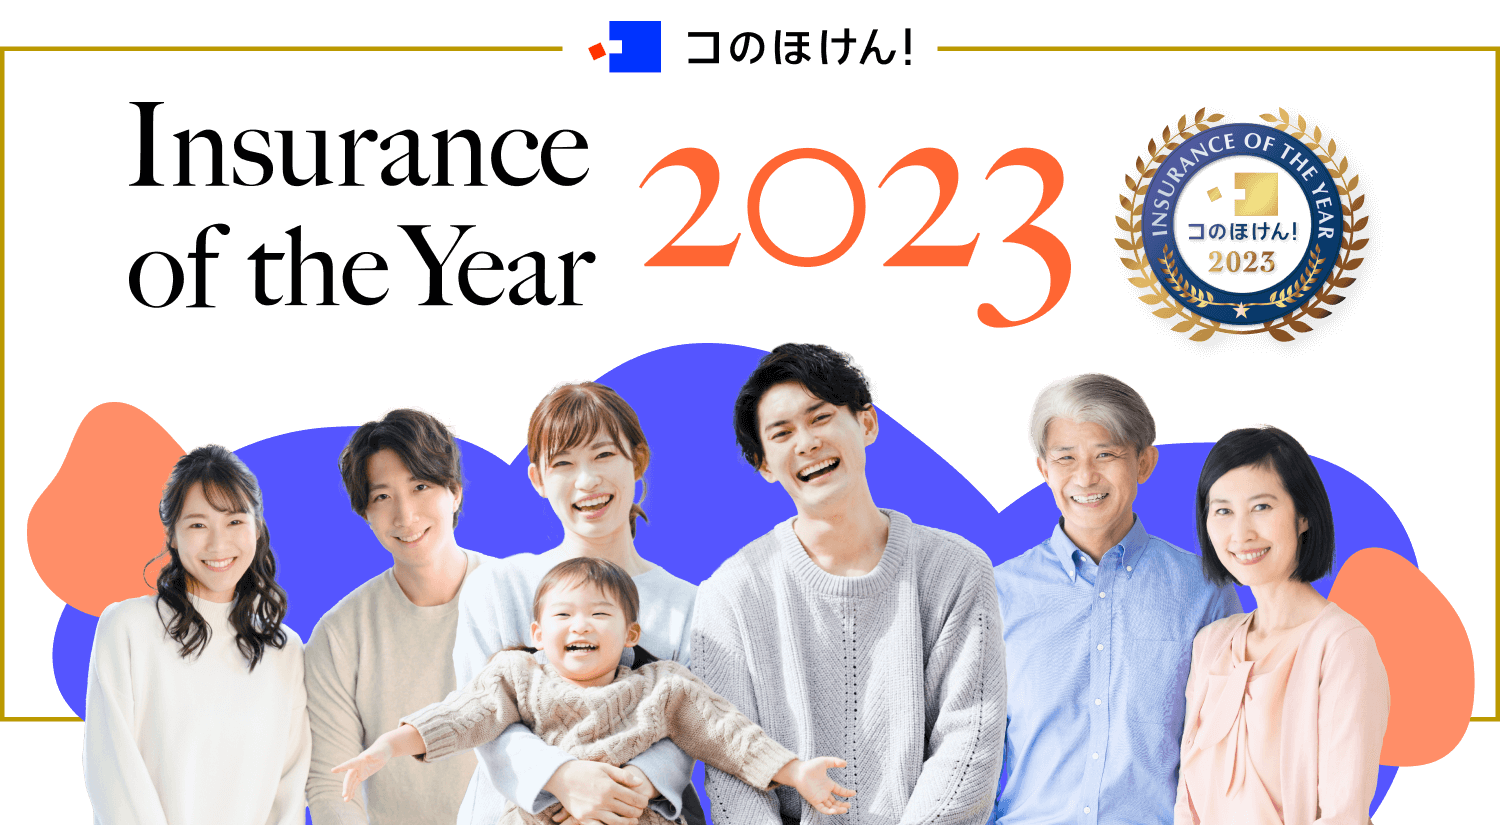 insurance of the year 2023のファーストビュー画像